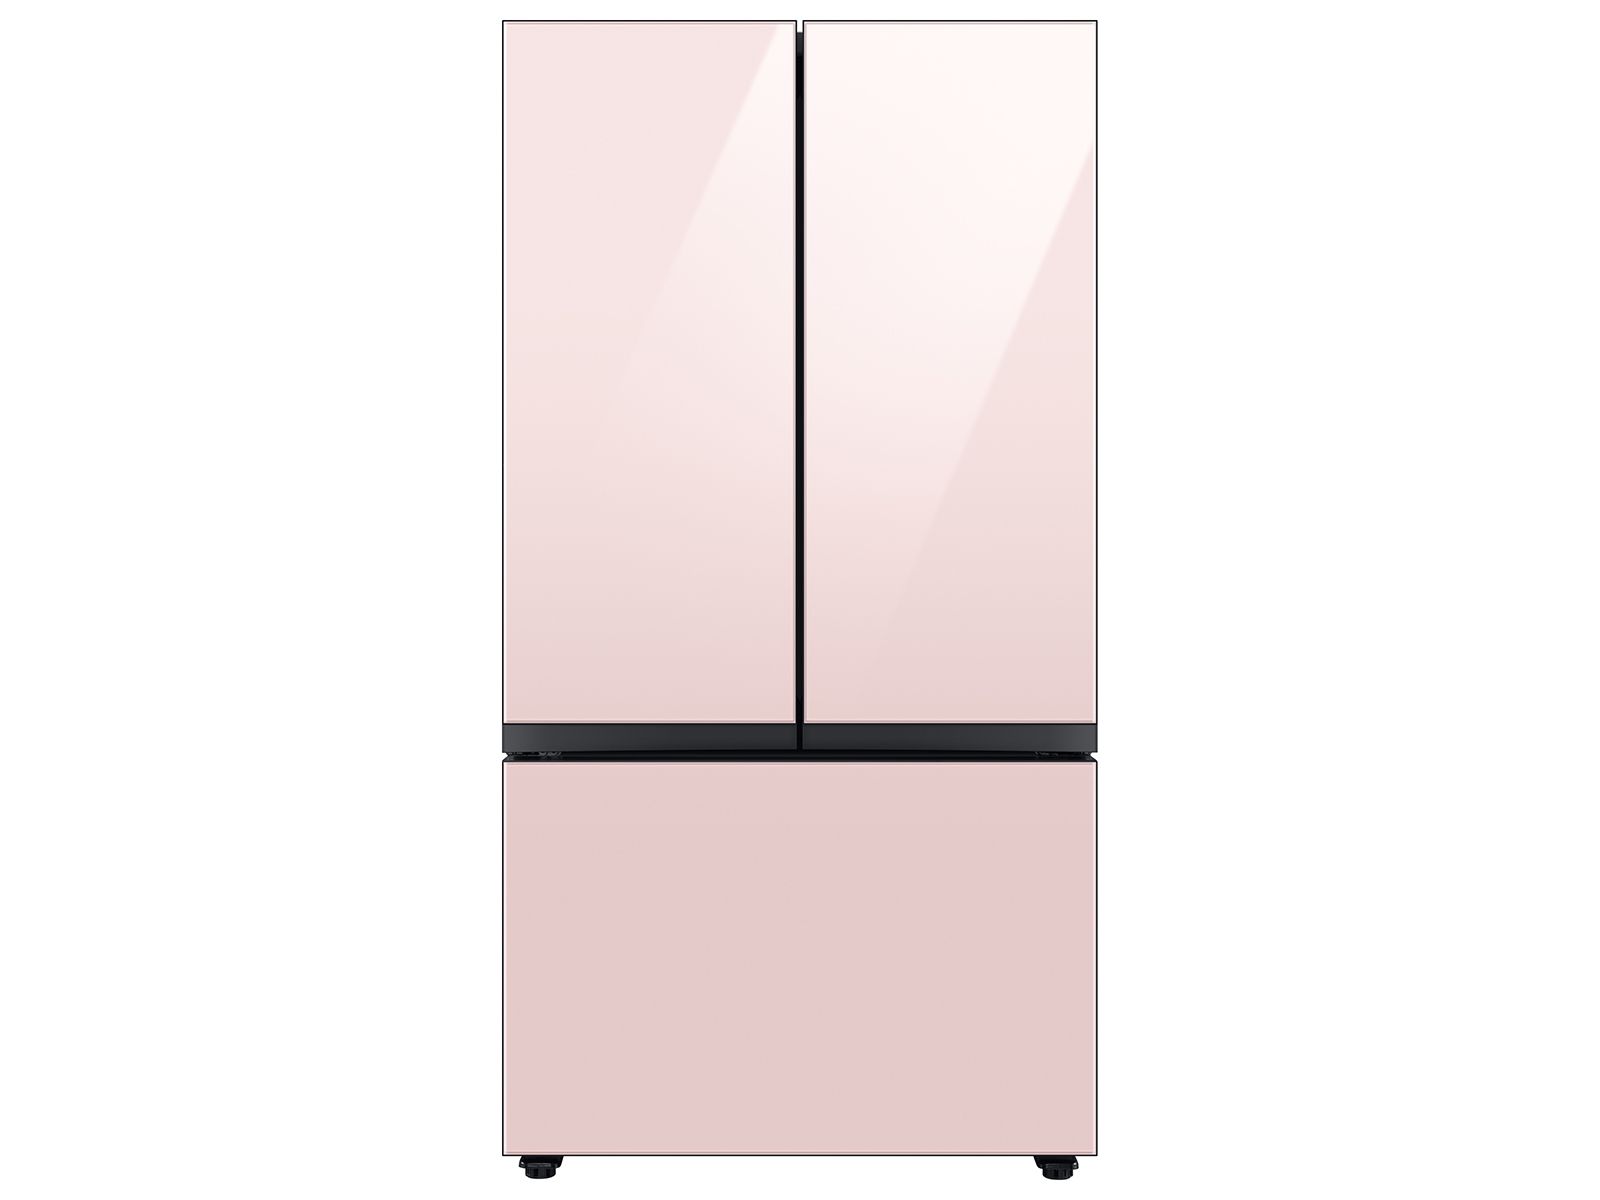 Samsung Bespoke 3-Door French Door Refrigerator (24 cu. ft.) with AutoFill Water Pitcher in Rose in Pink Glass(BNDL-1650466356069)